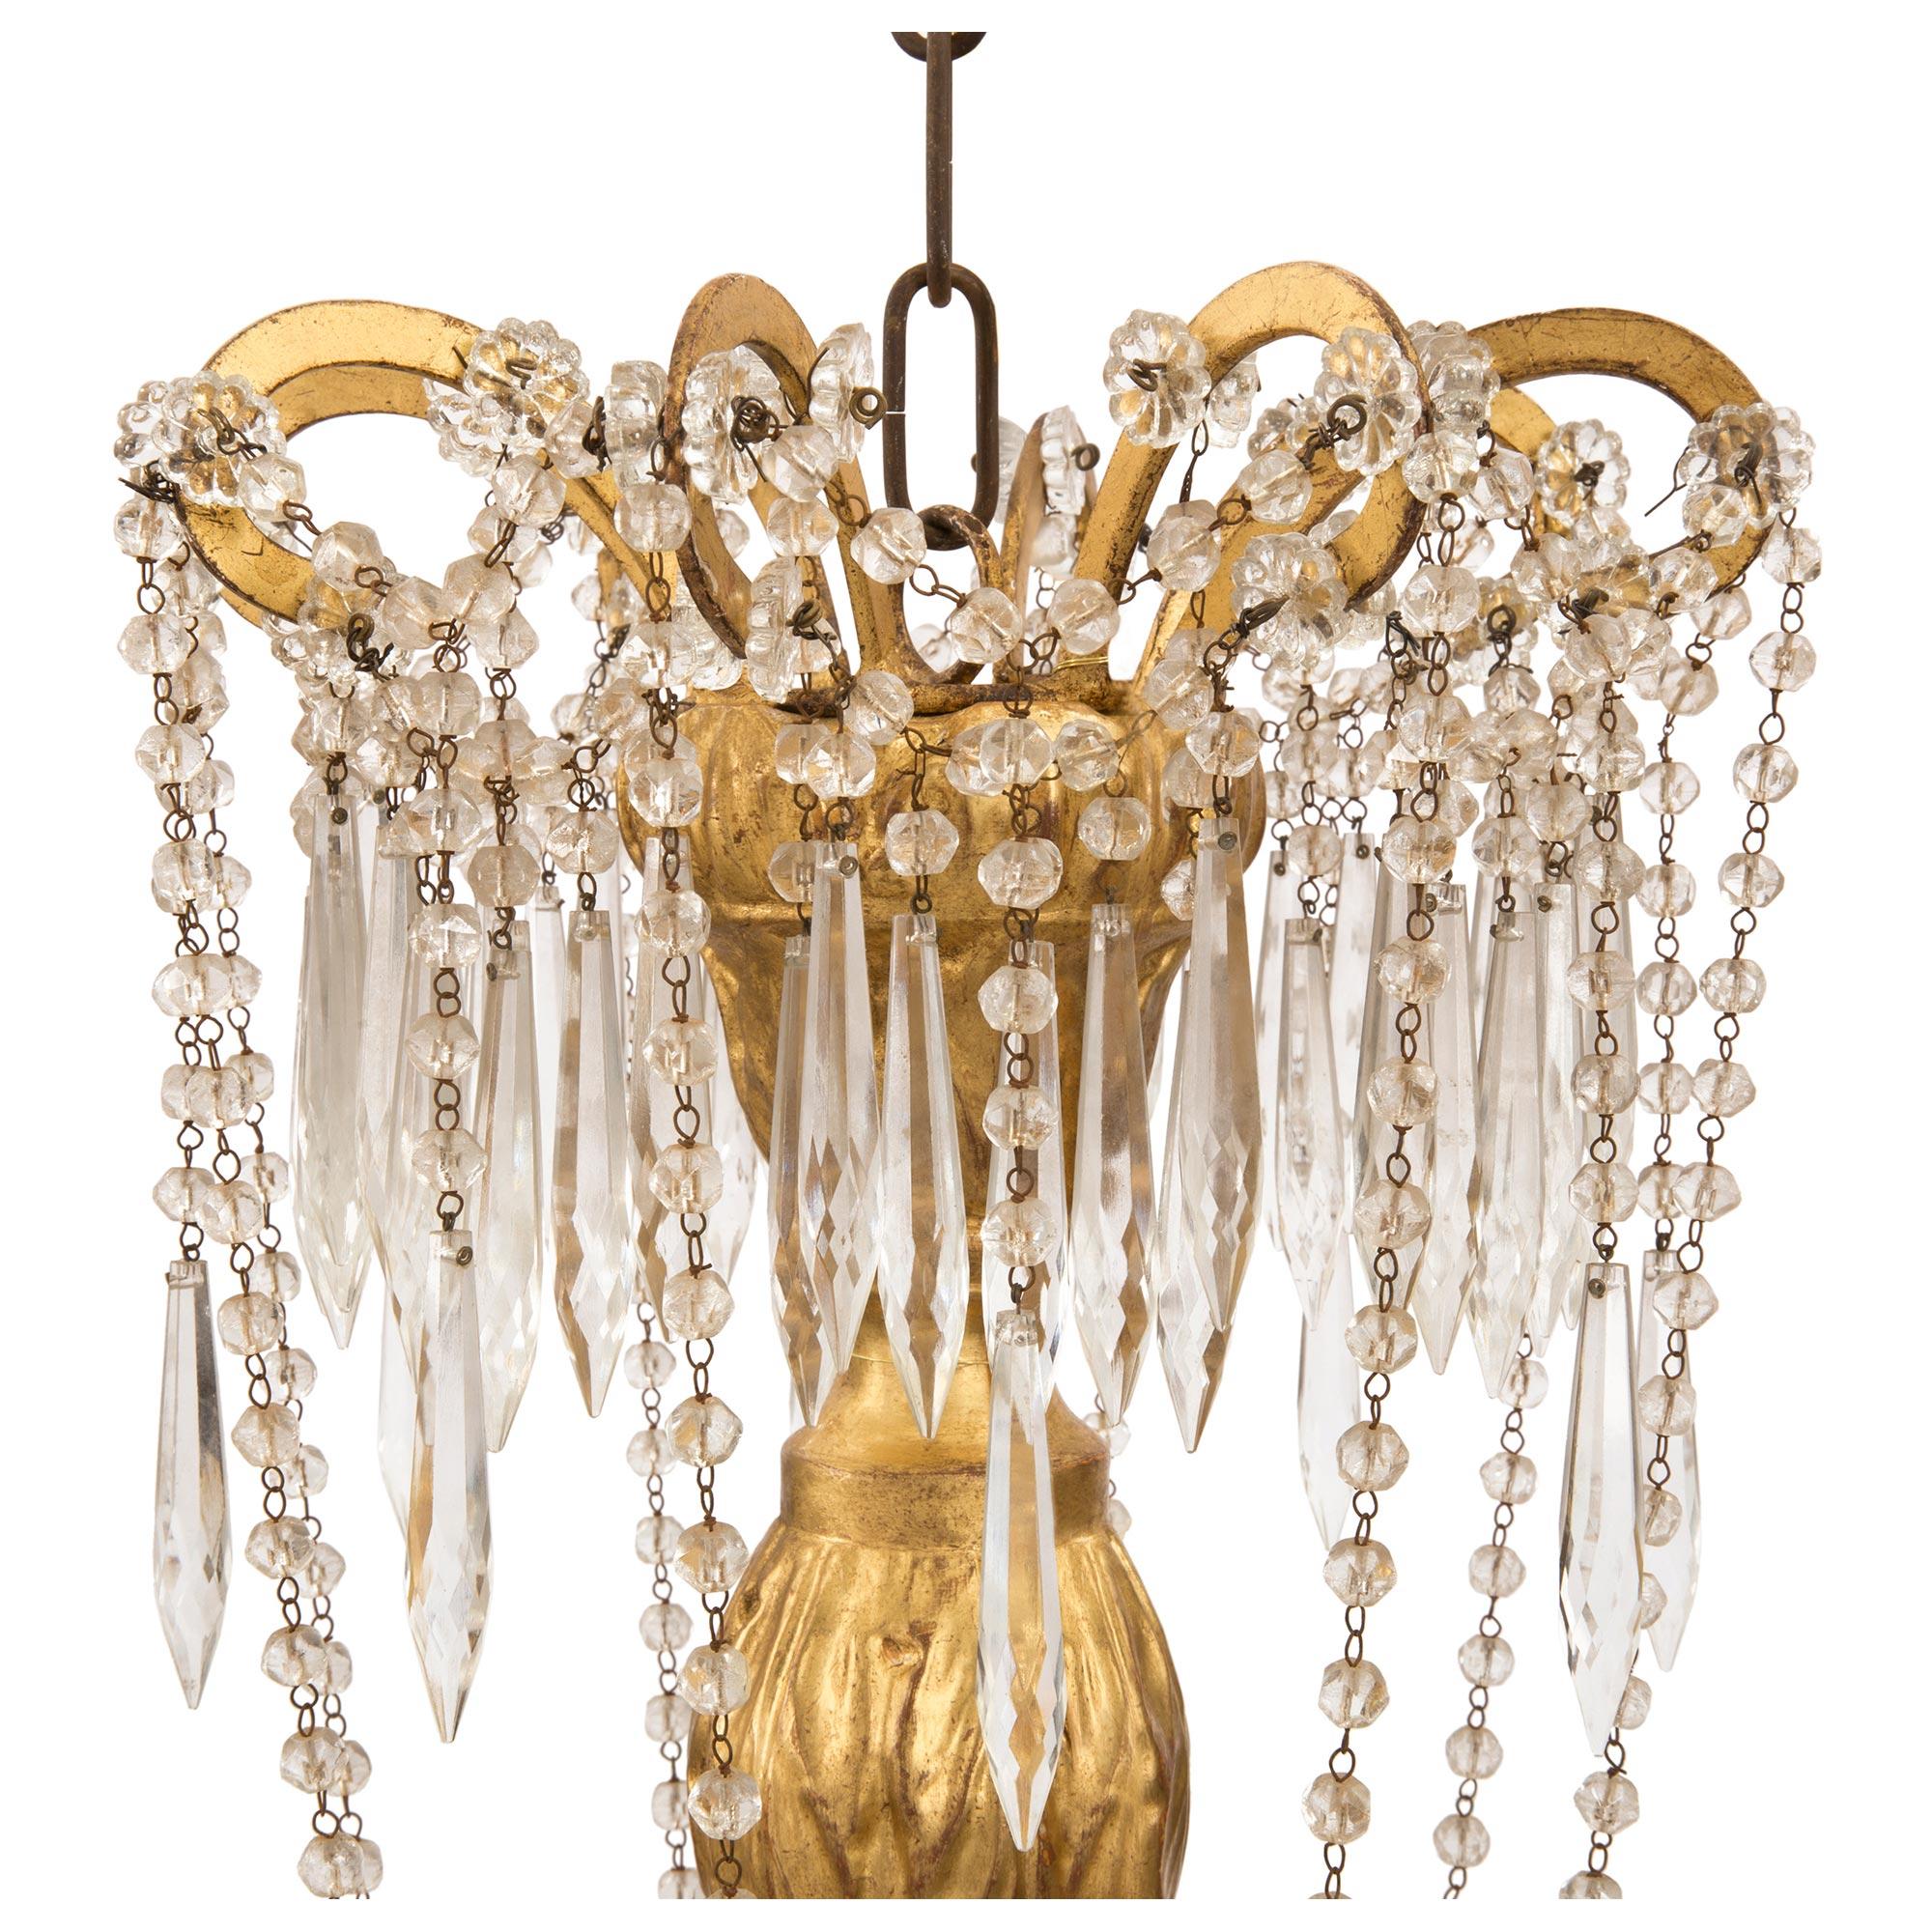 Italian 19th Century Louis XVI Style Giltwood, Metal and Crystal Chandelier In Good Condition For Sale In West Palm Beach, FL